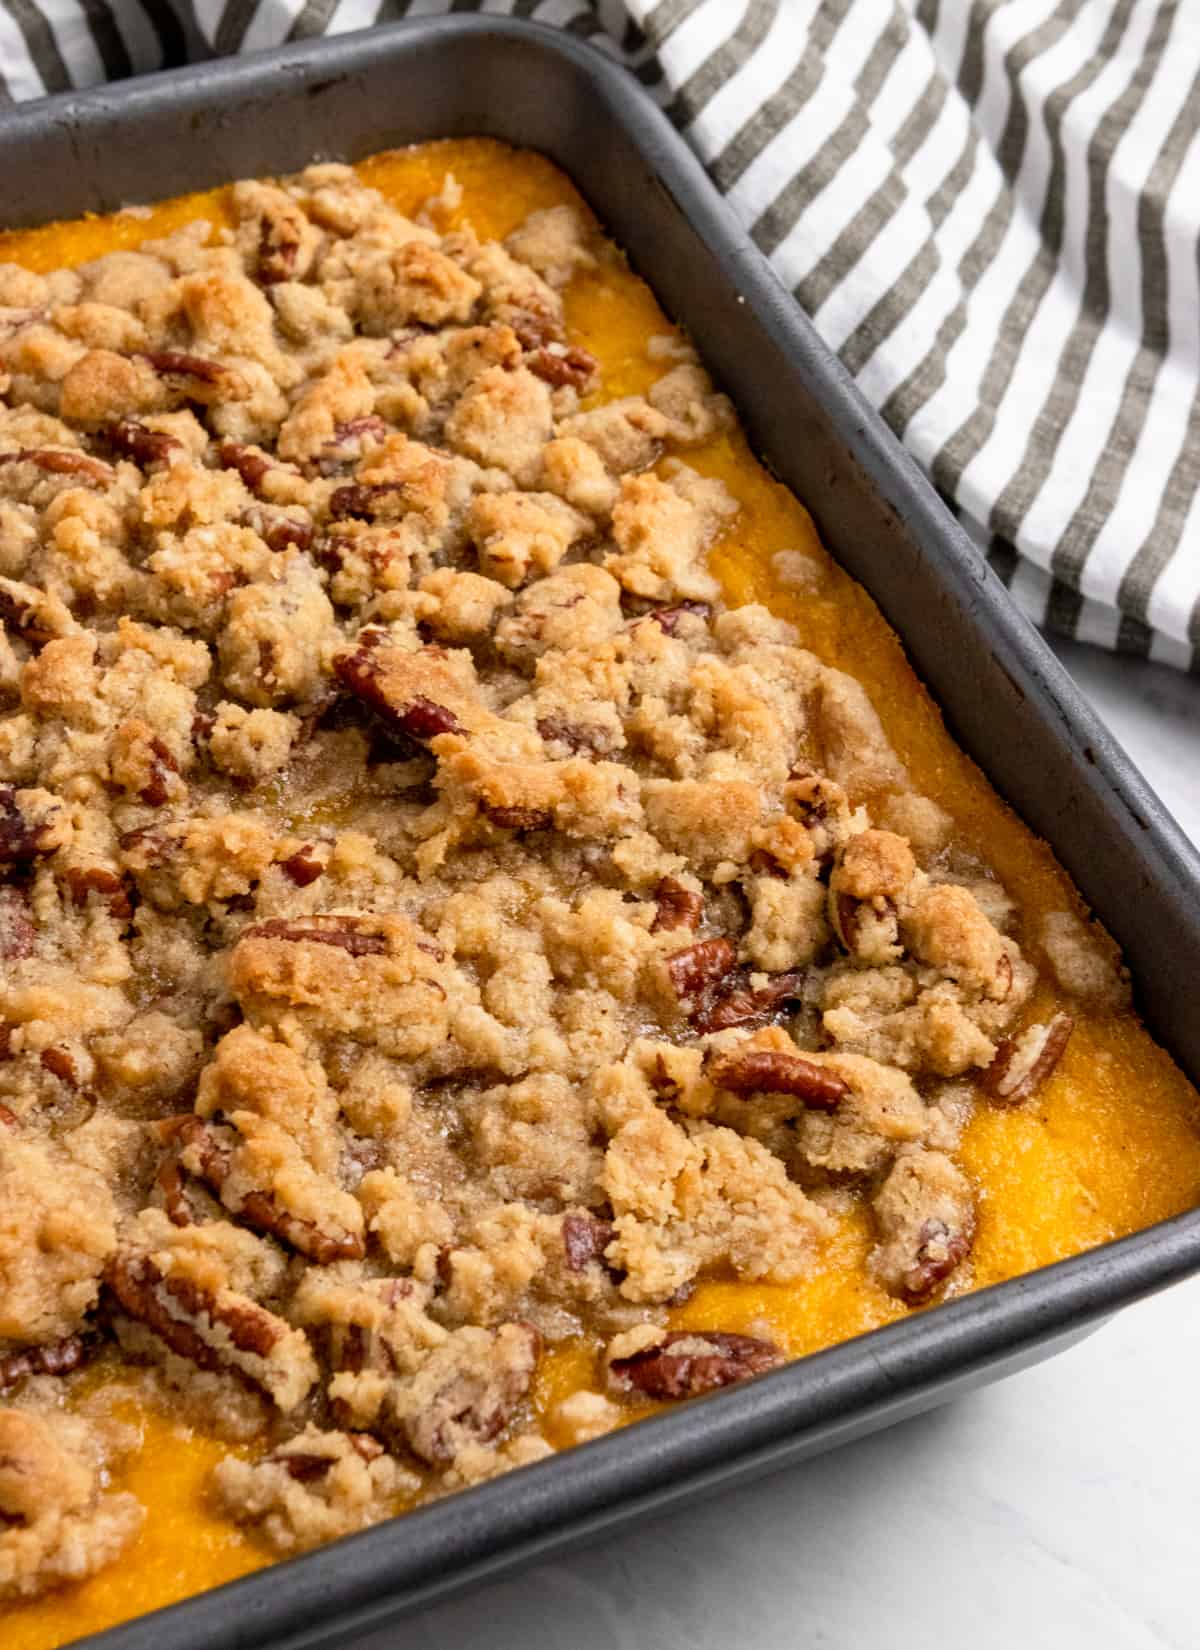 Butternut squash casserole in pan with striped linens.